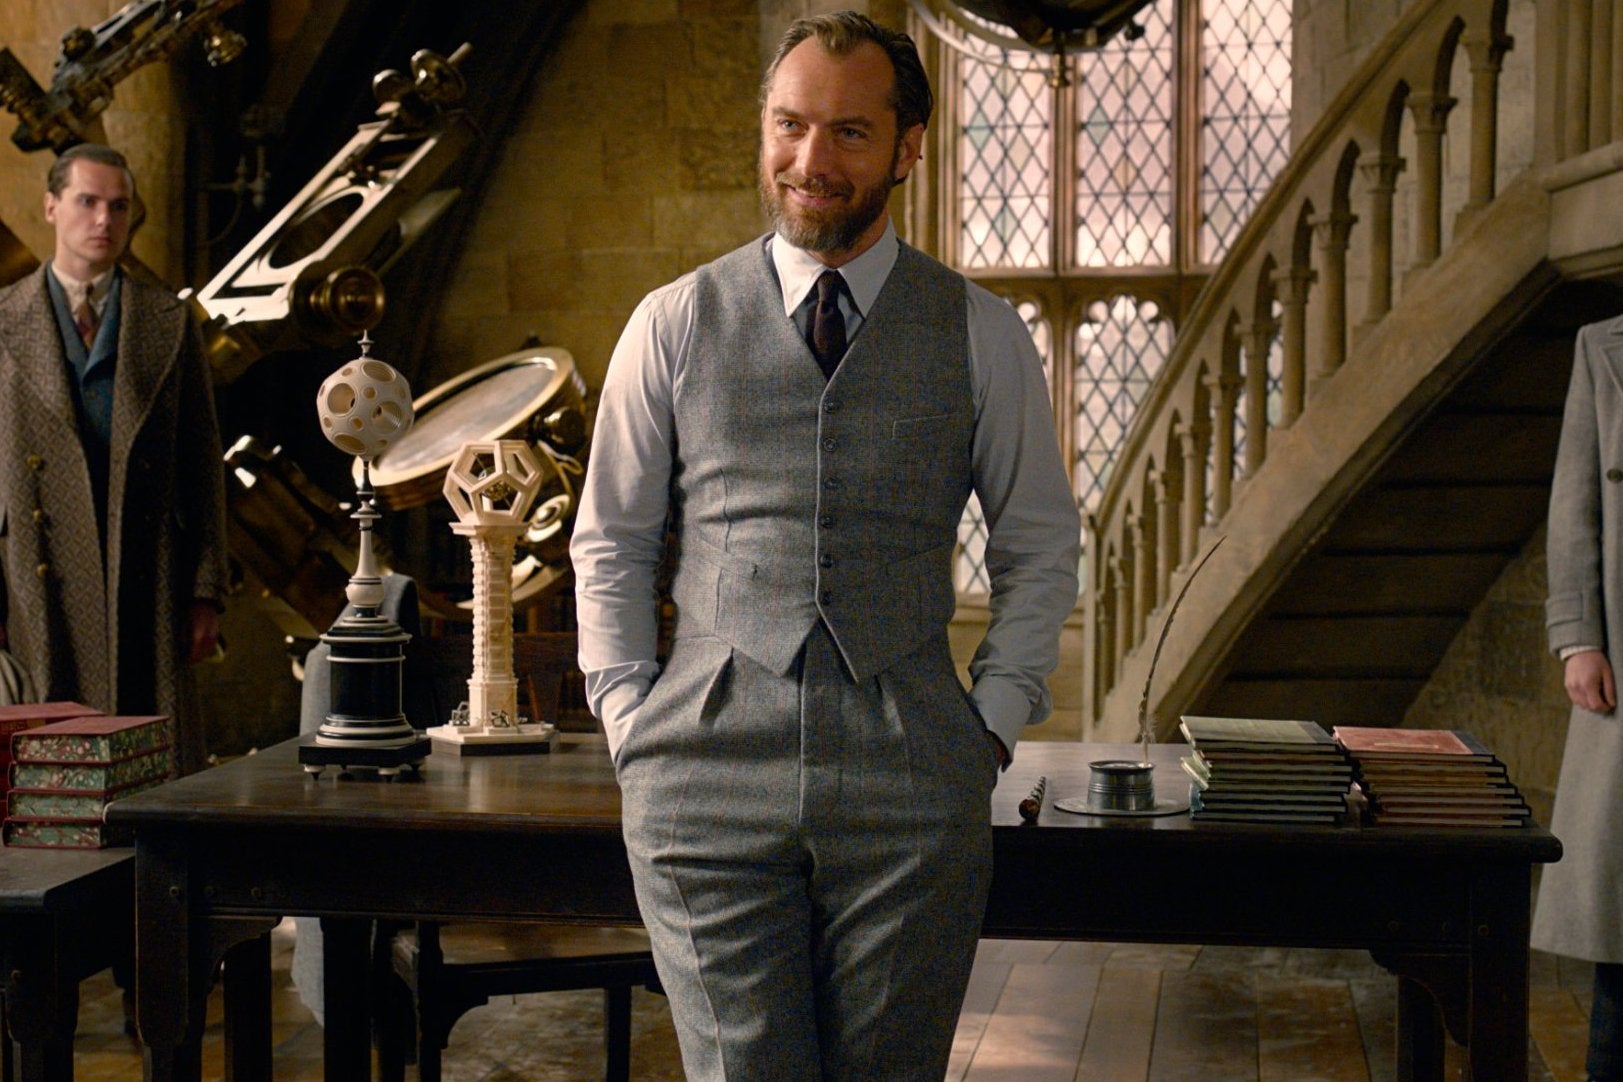 Jude Law as Albus Dumbledore in a scene from ‘Fantastic Beasts: The Crimes of Grindelwald’